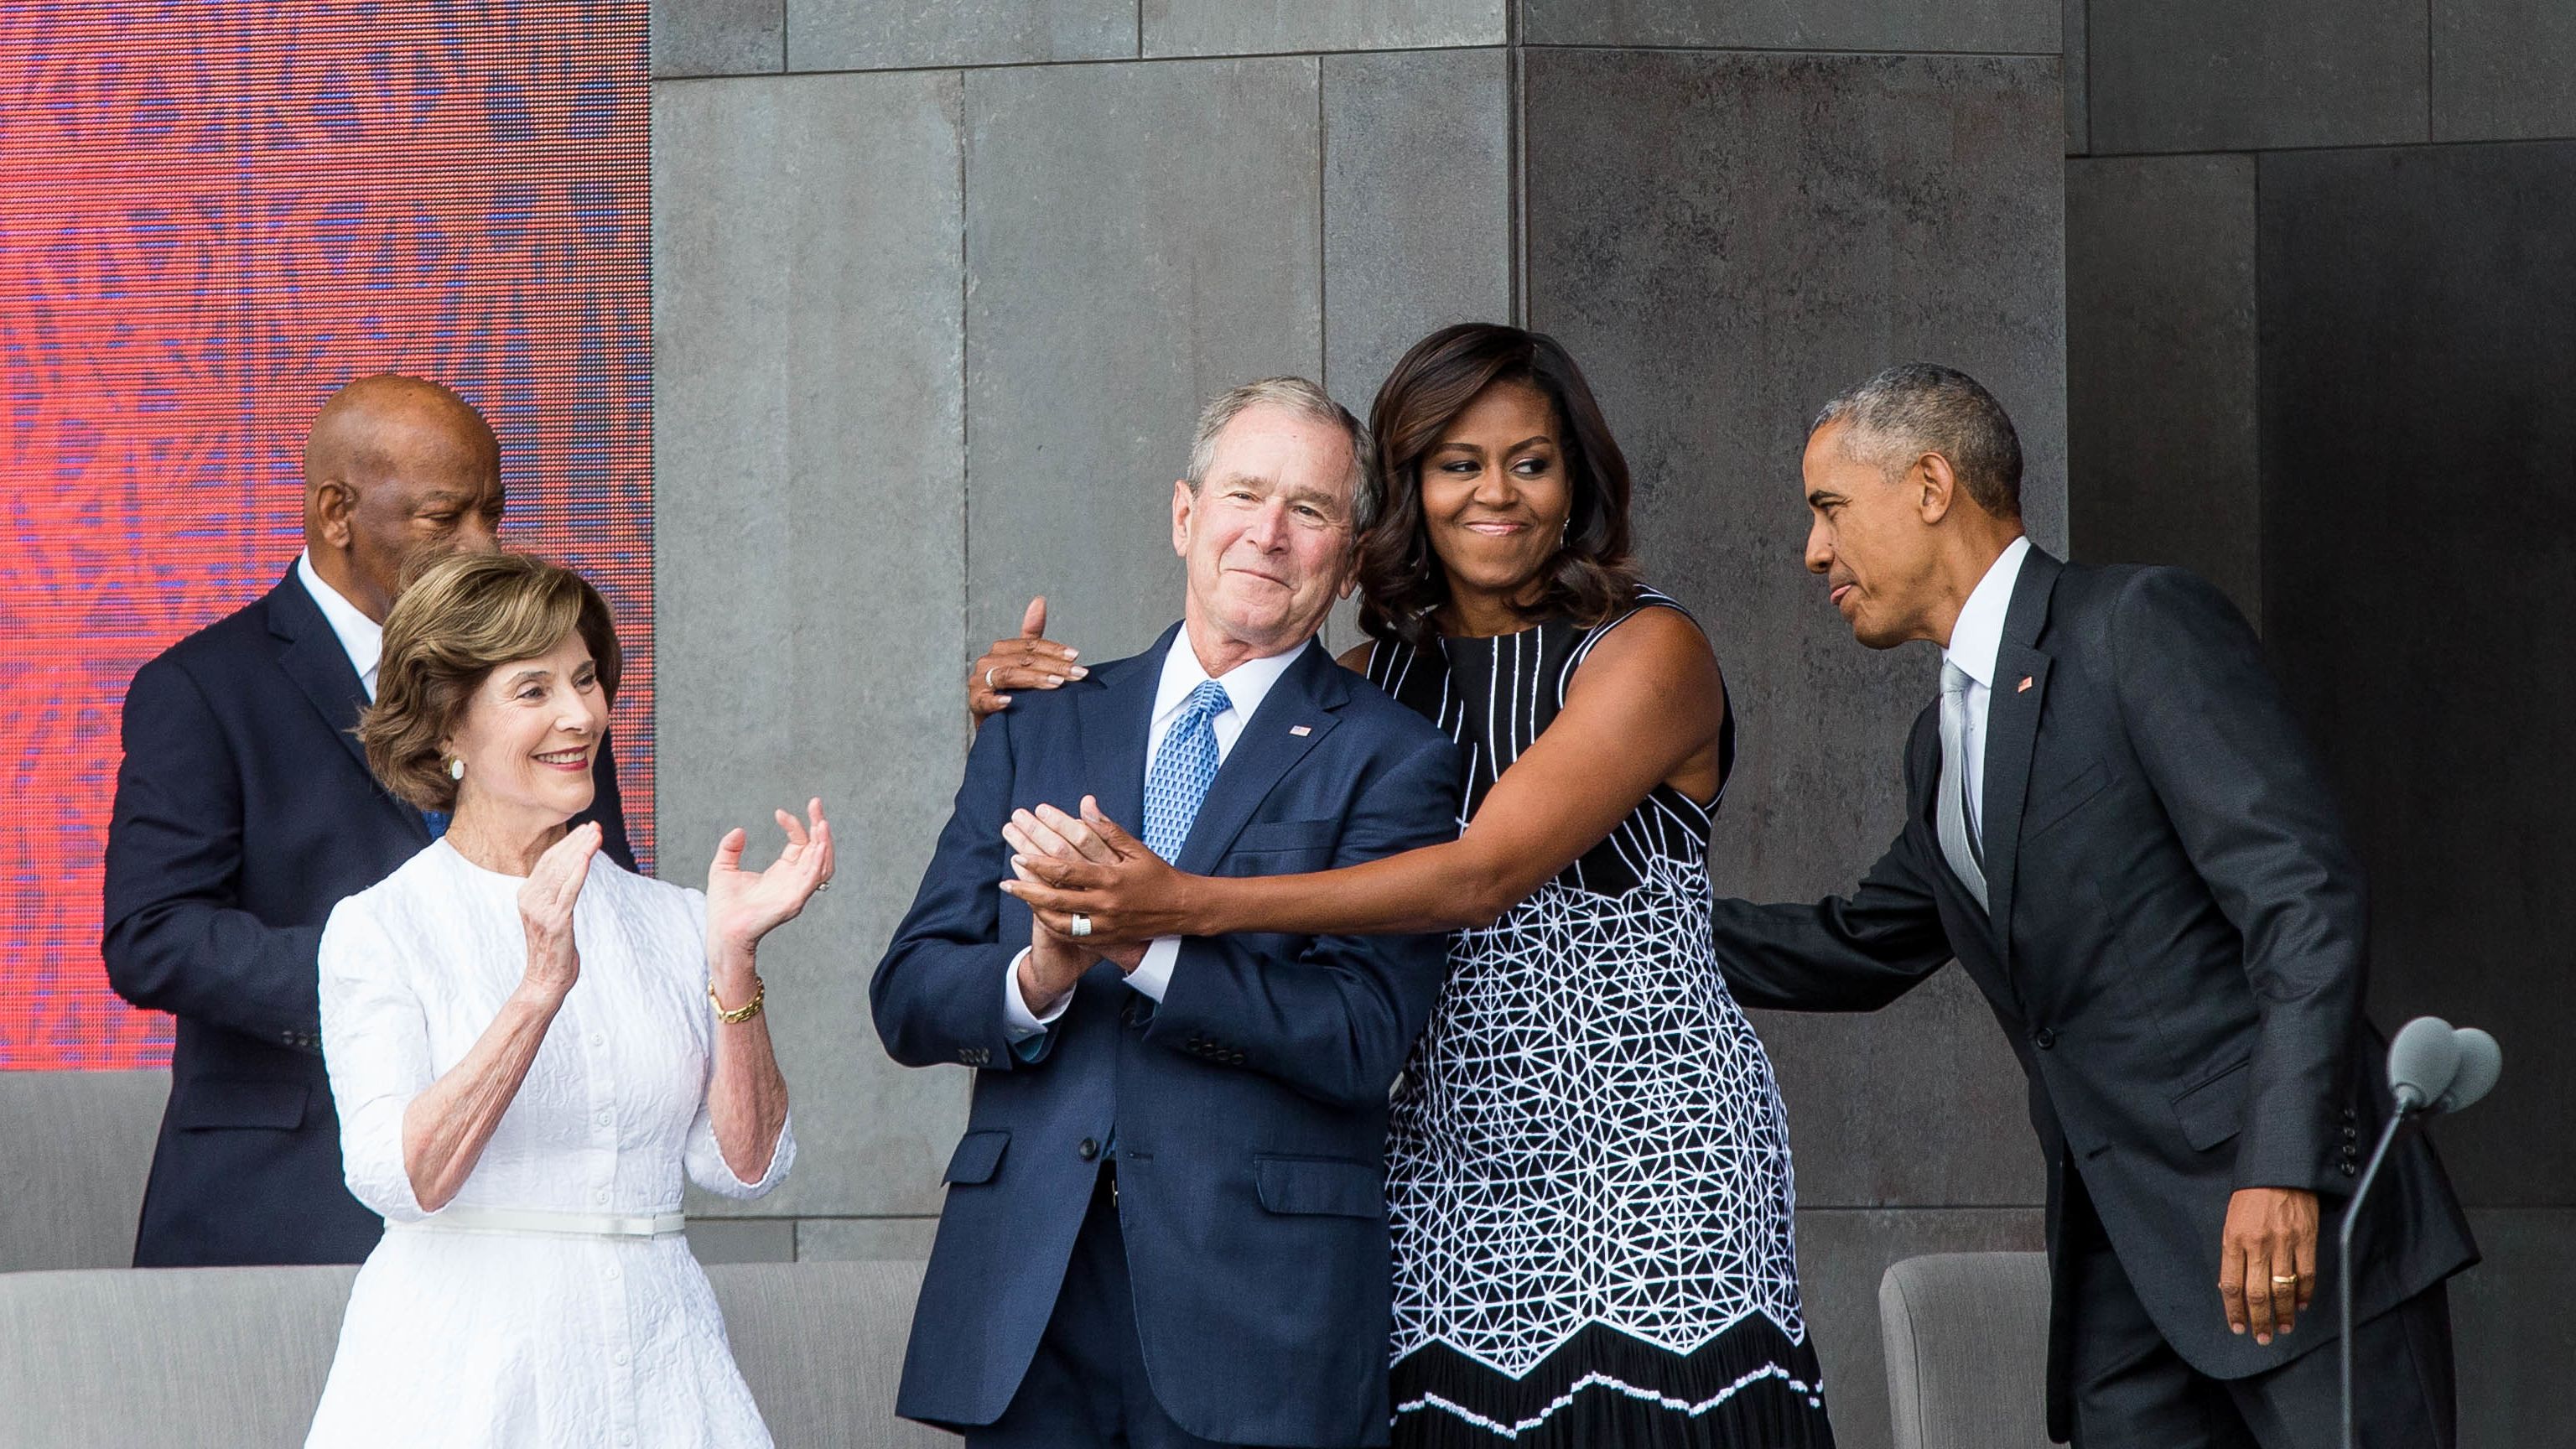 Former first lady Laura Bush, former President George W. Bush, first lady Michelle Obama and President Barack Obama attend the opening ceremony for the Smithsonian National Museum of African American History and Culture on September 24, 2016, in Washington. 